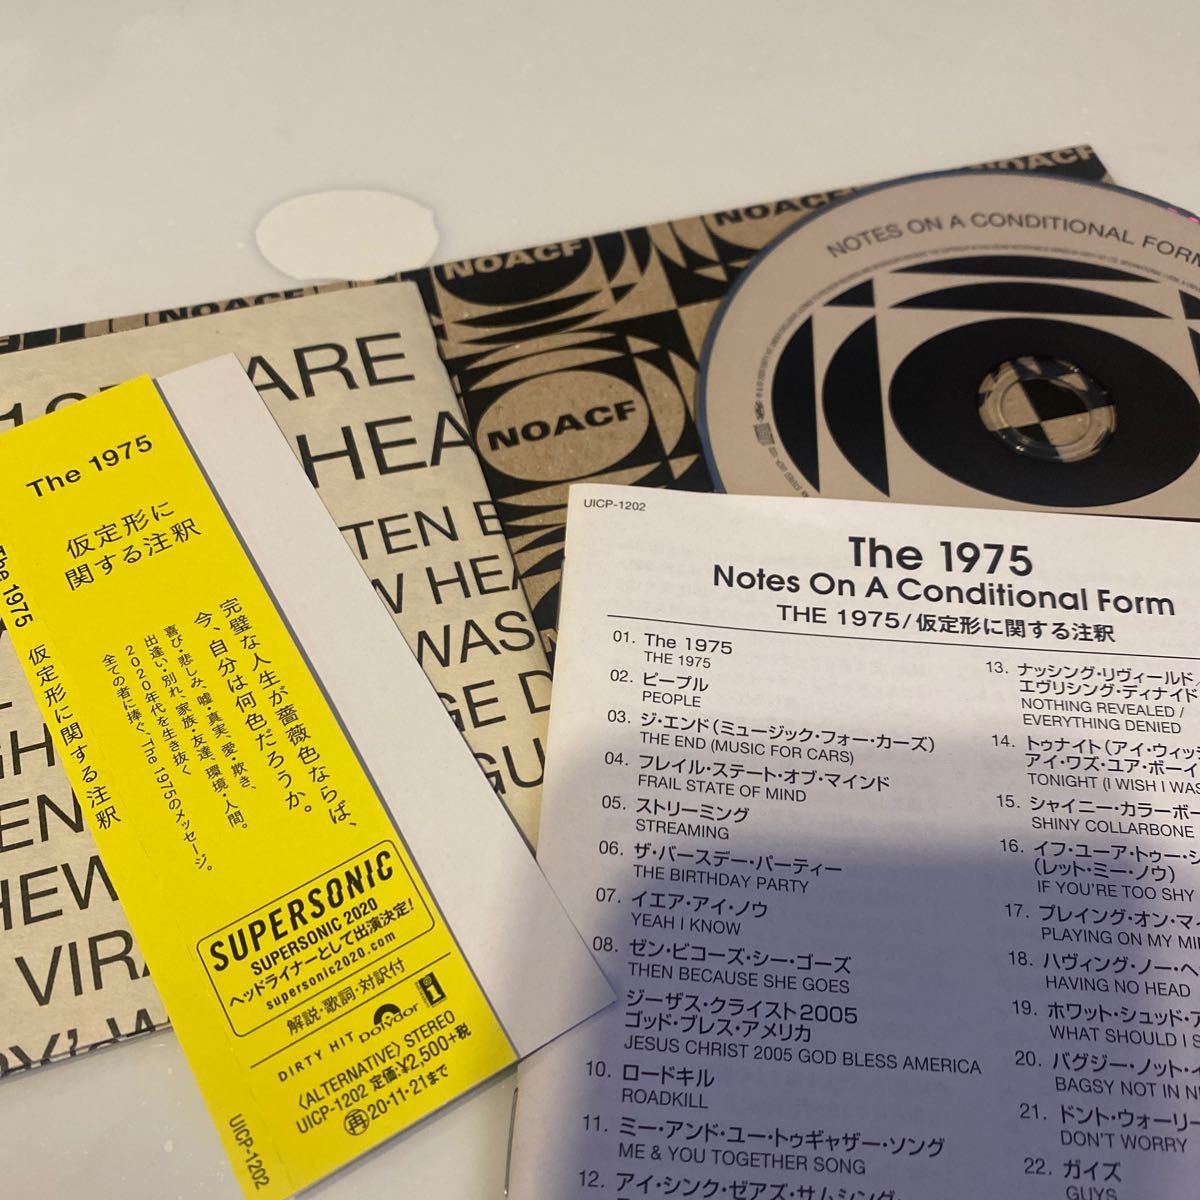 The 1975 “Notes On A Conditional Form”